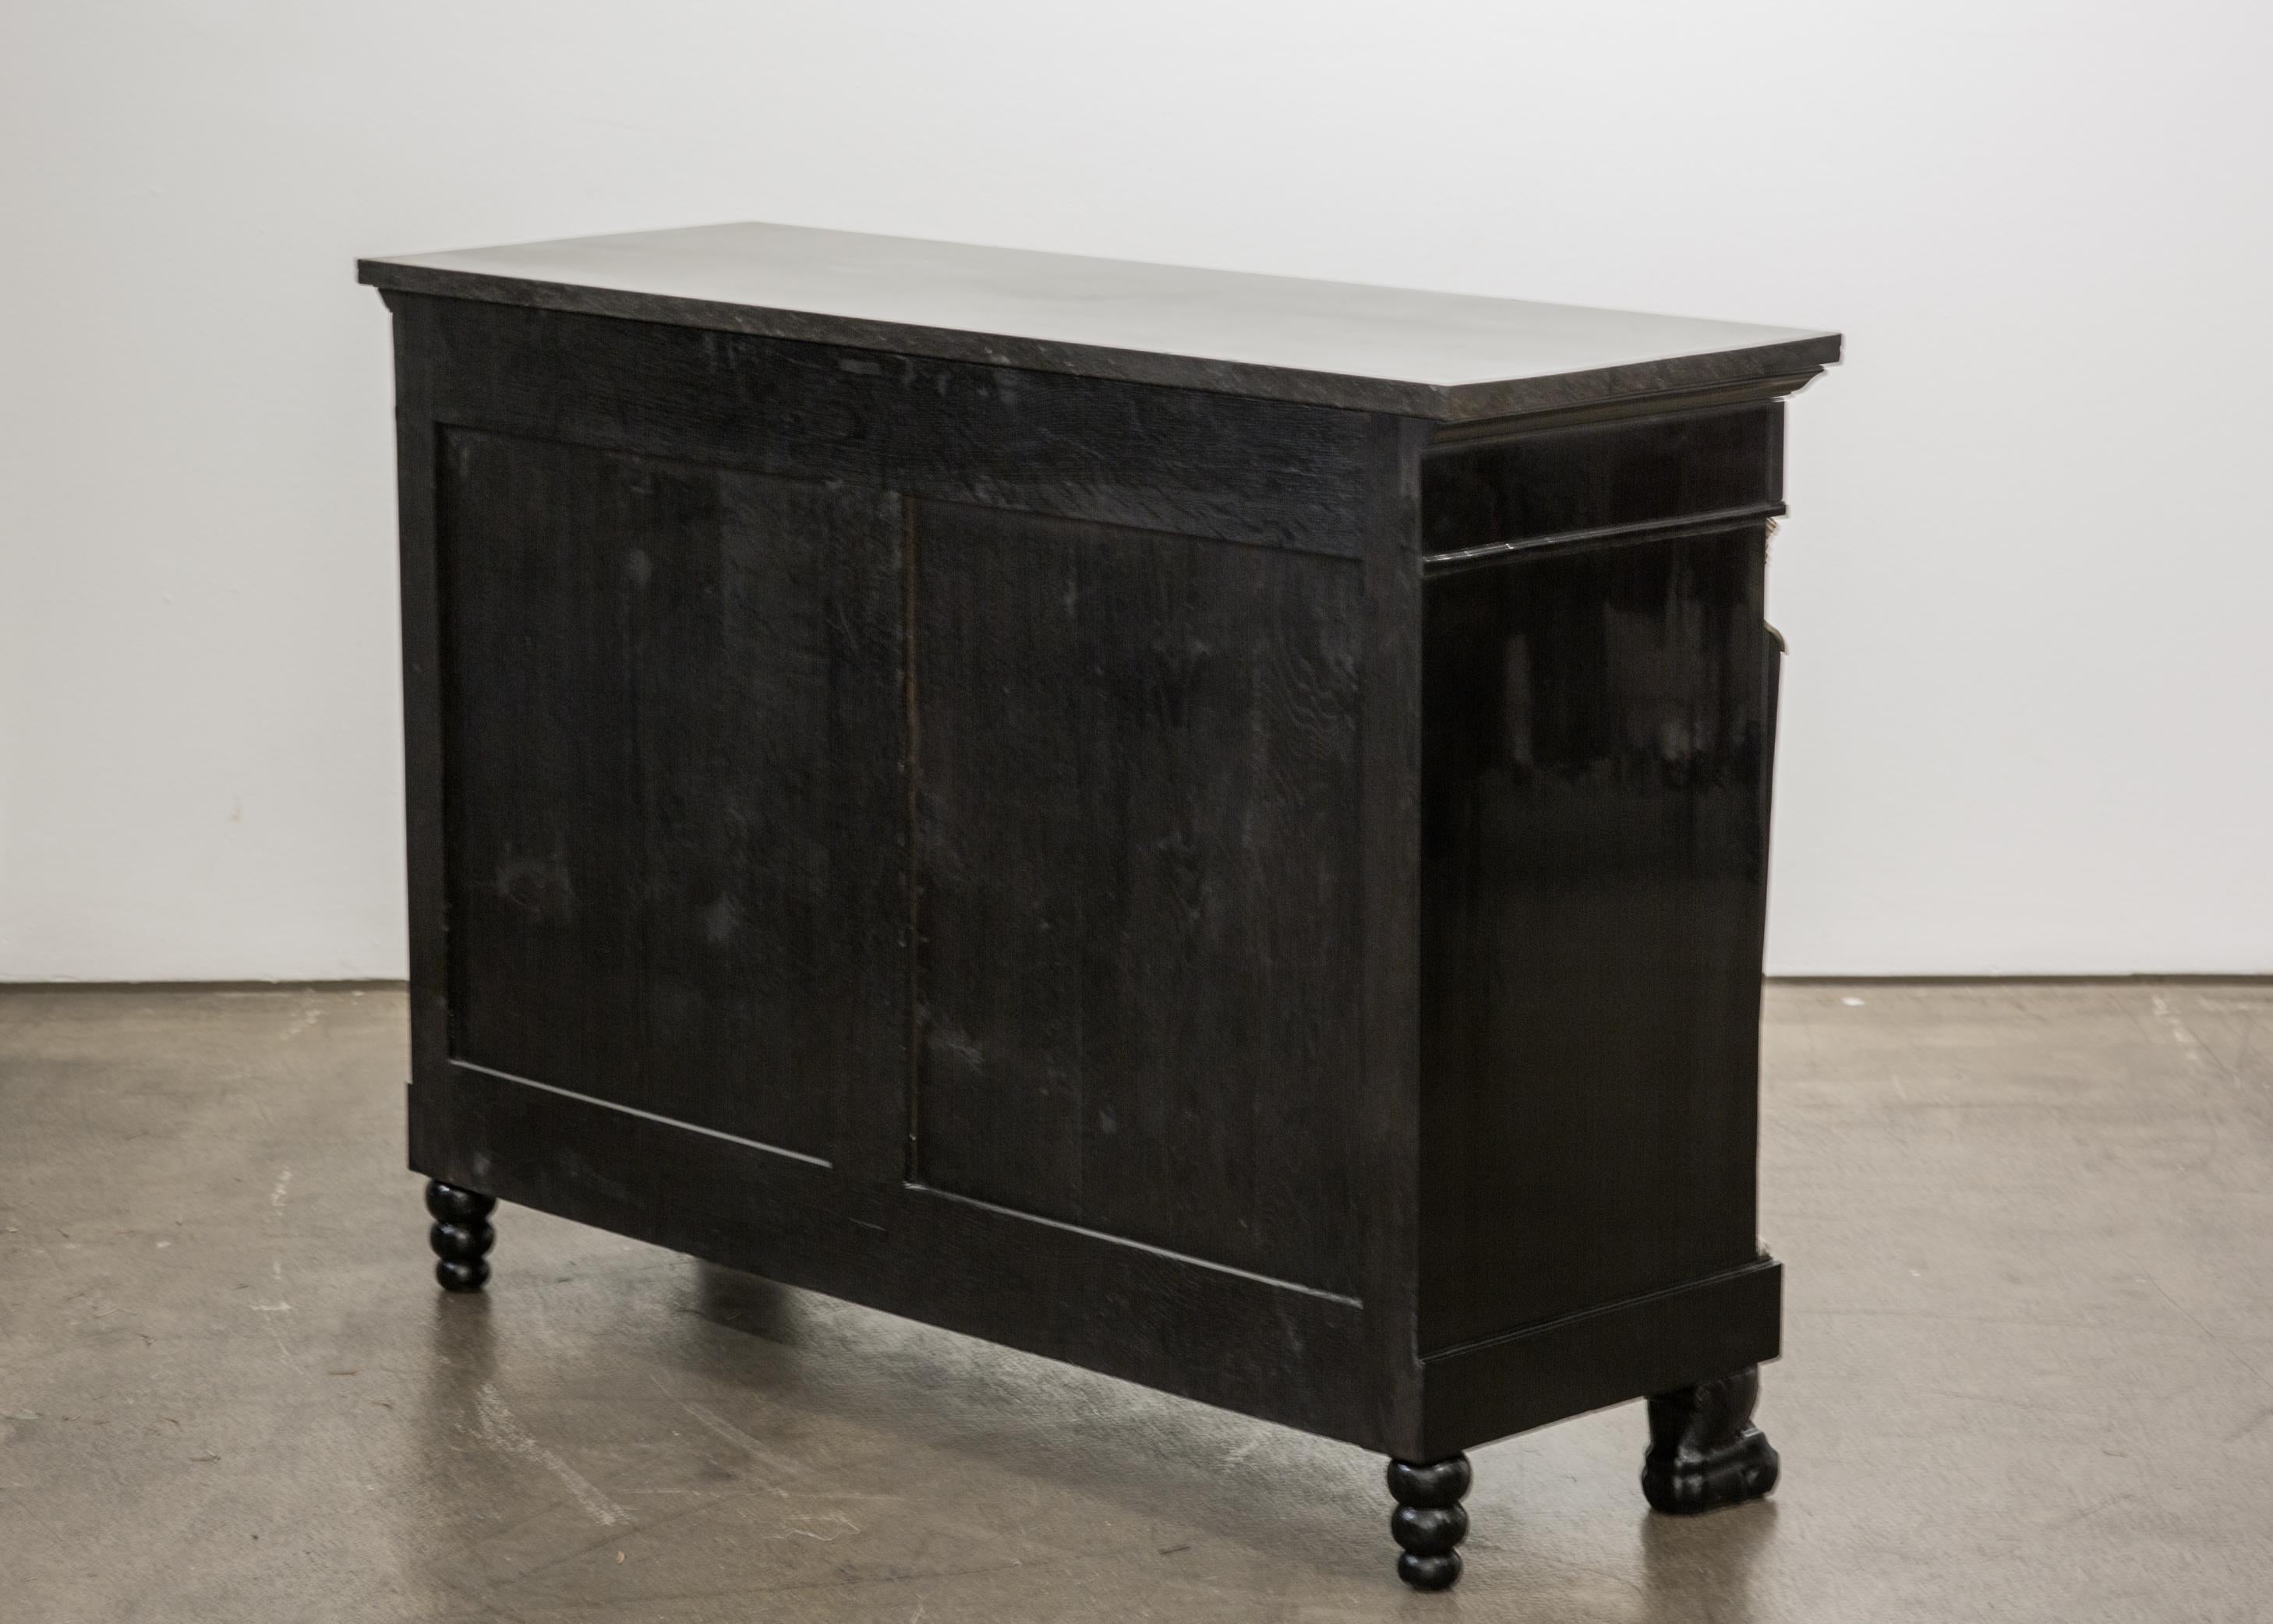 Silvered Antique Ebonized Empire Chest of Drawers from France, 19th Century